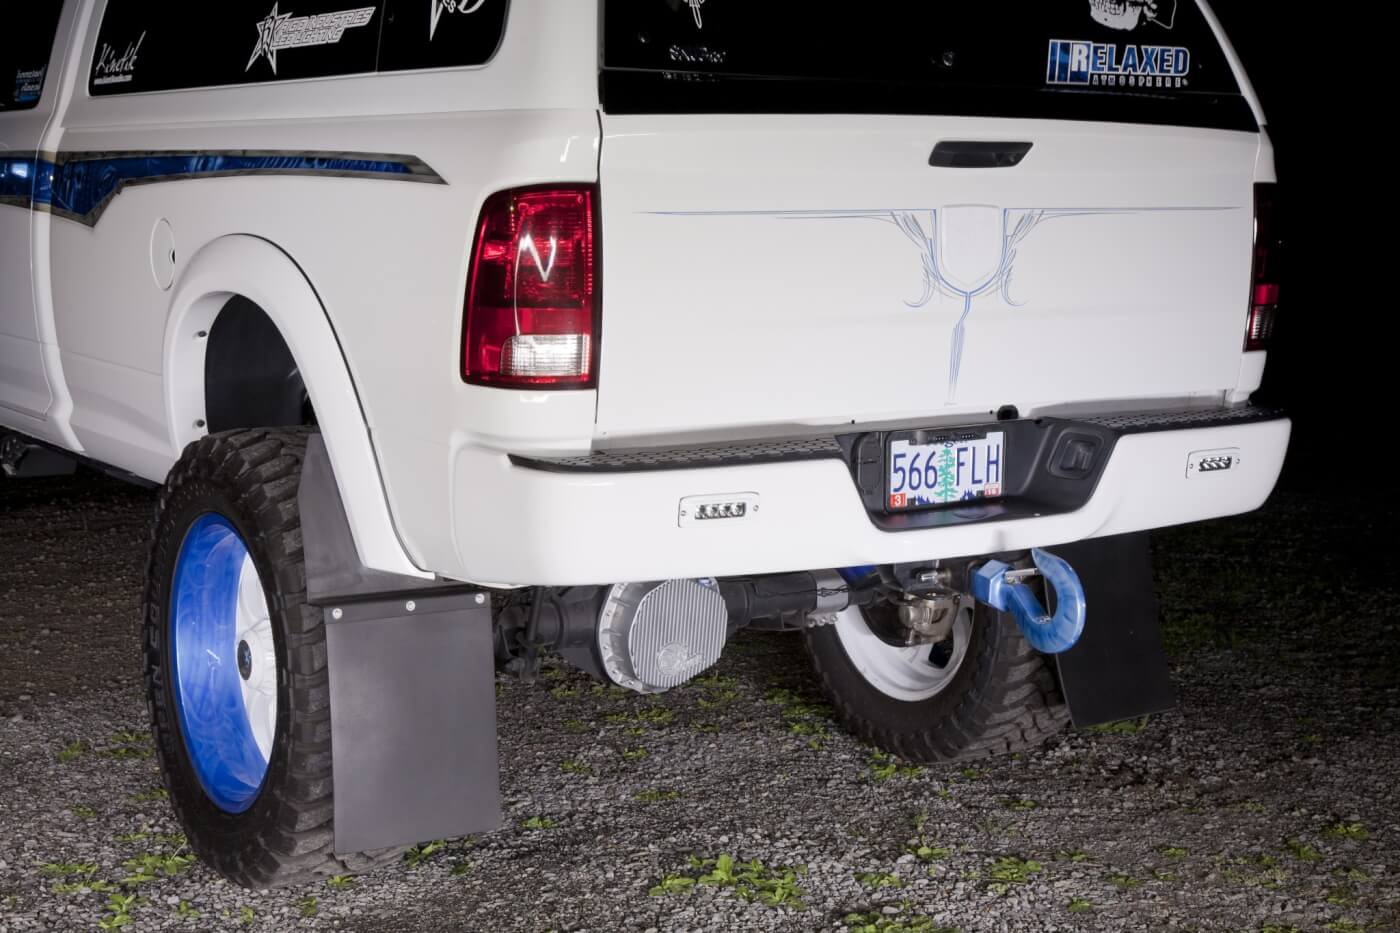 Pin stripes, a color-matched bumper and Monster Hooks tow hook adorn the truck’s rear.